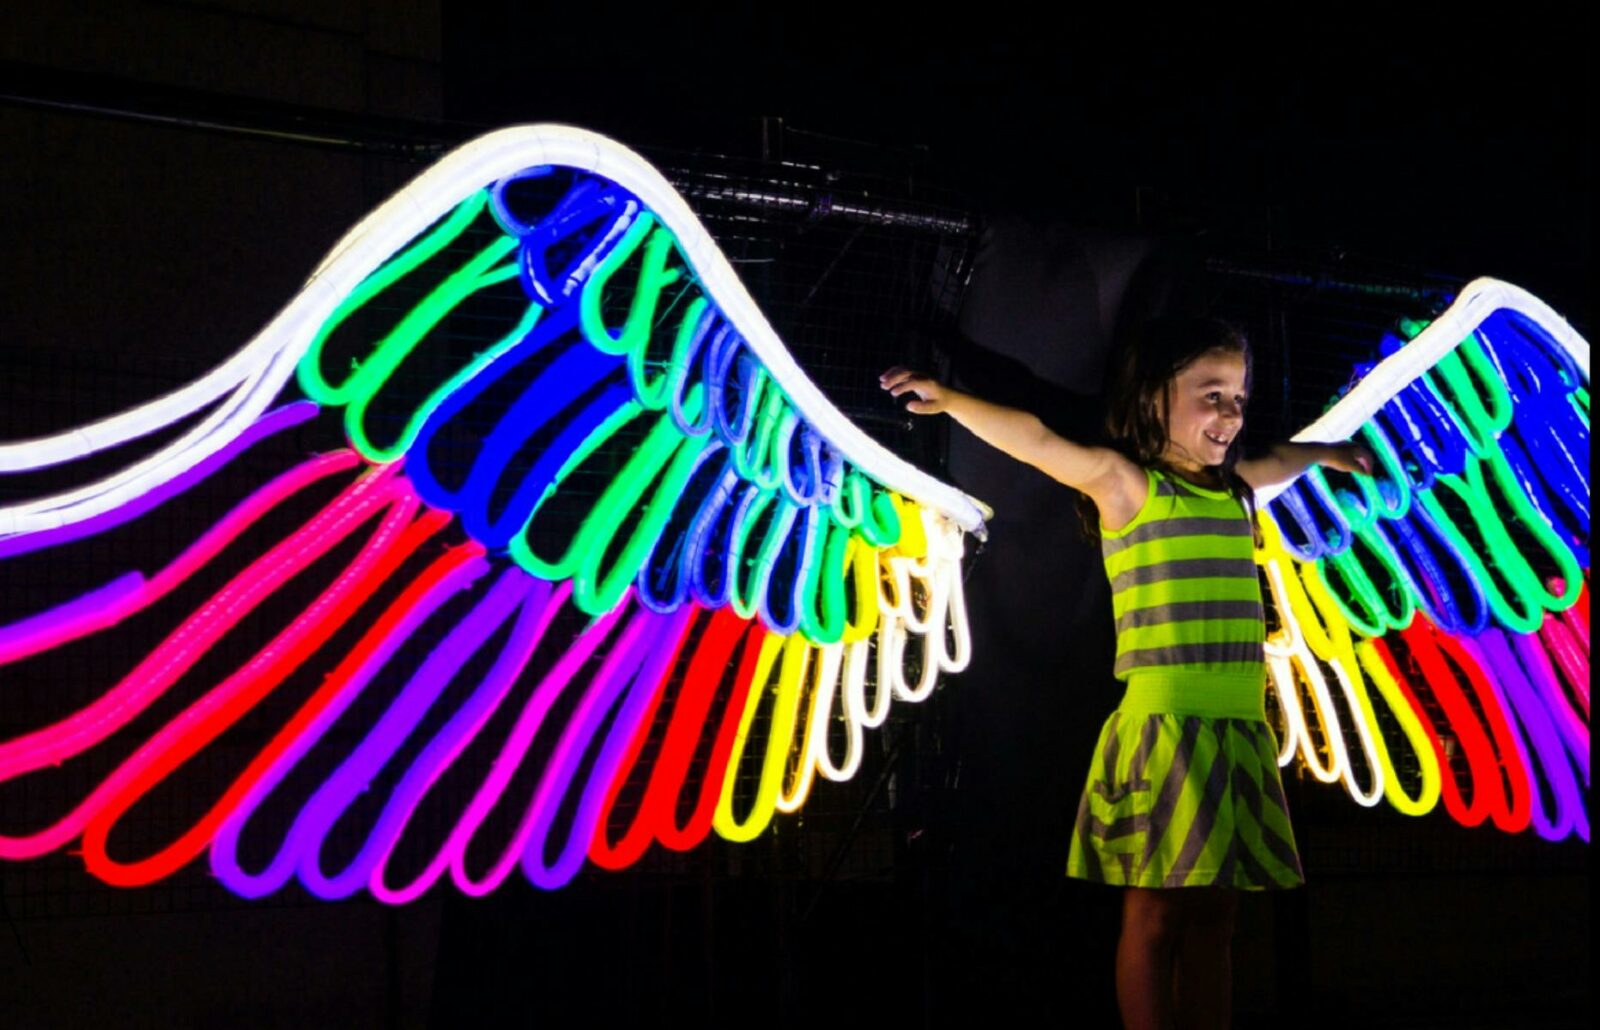 A young girl standing in front of colourful neon wings at night time